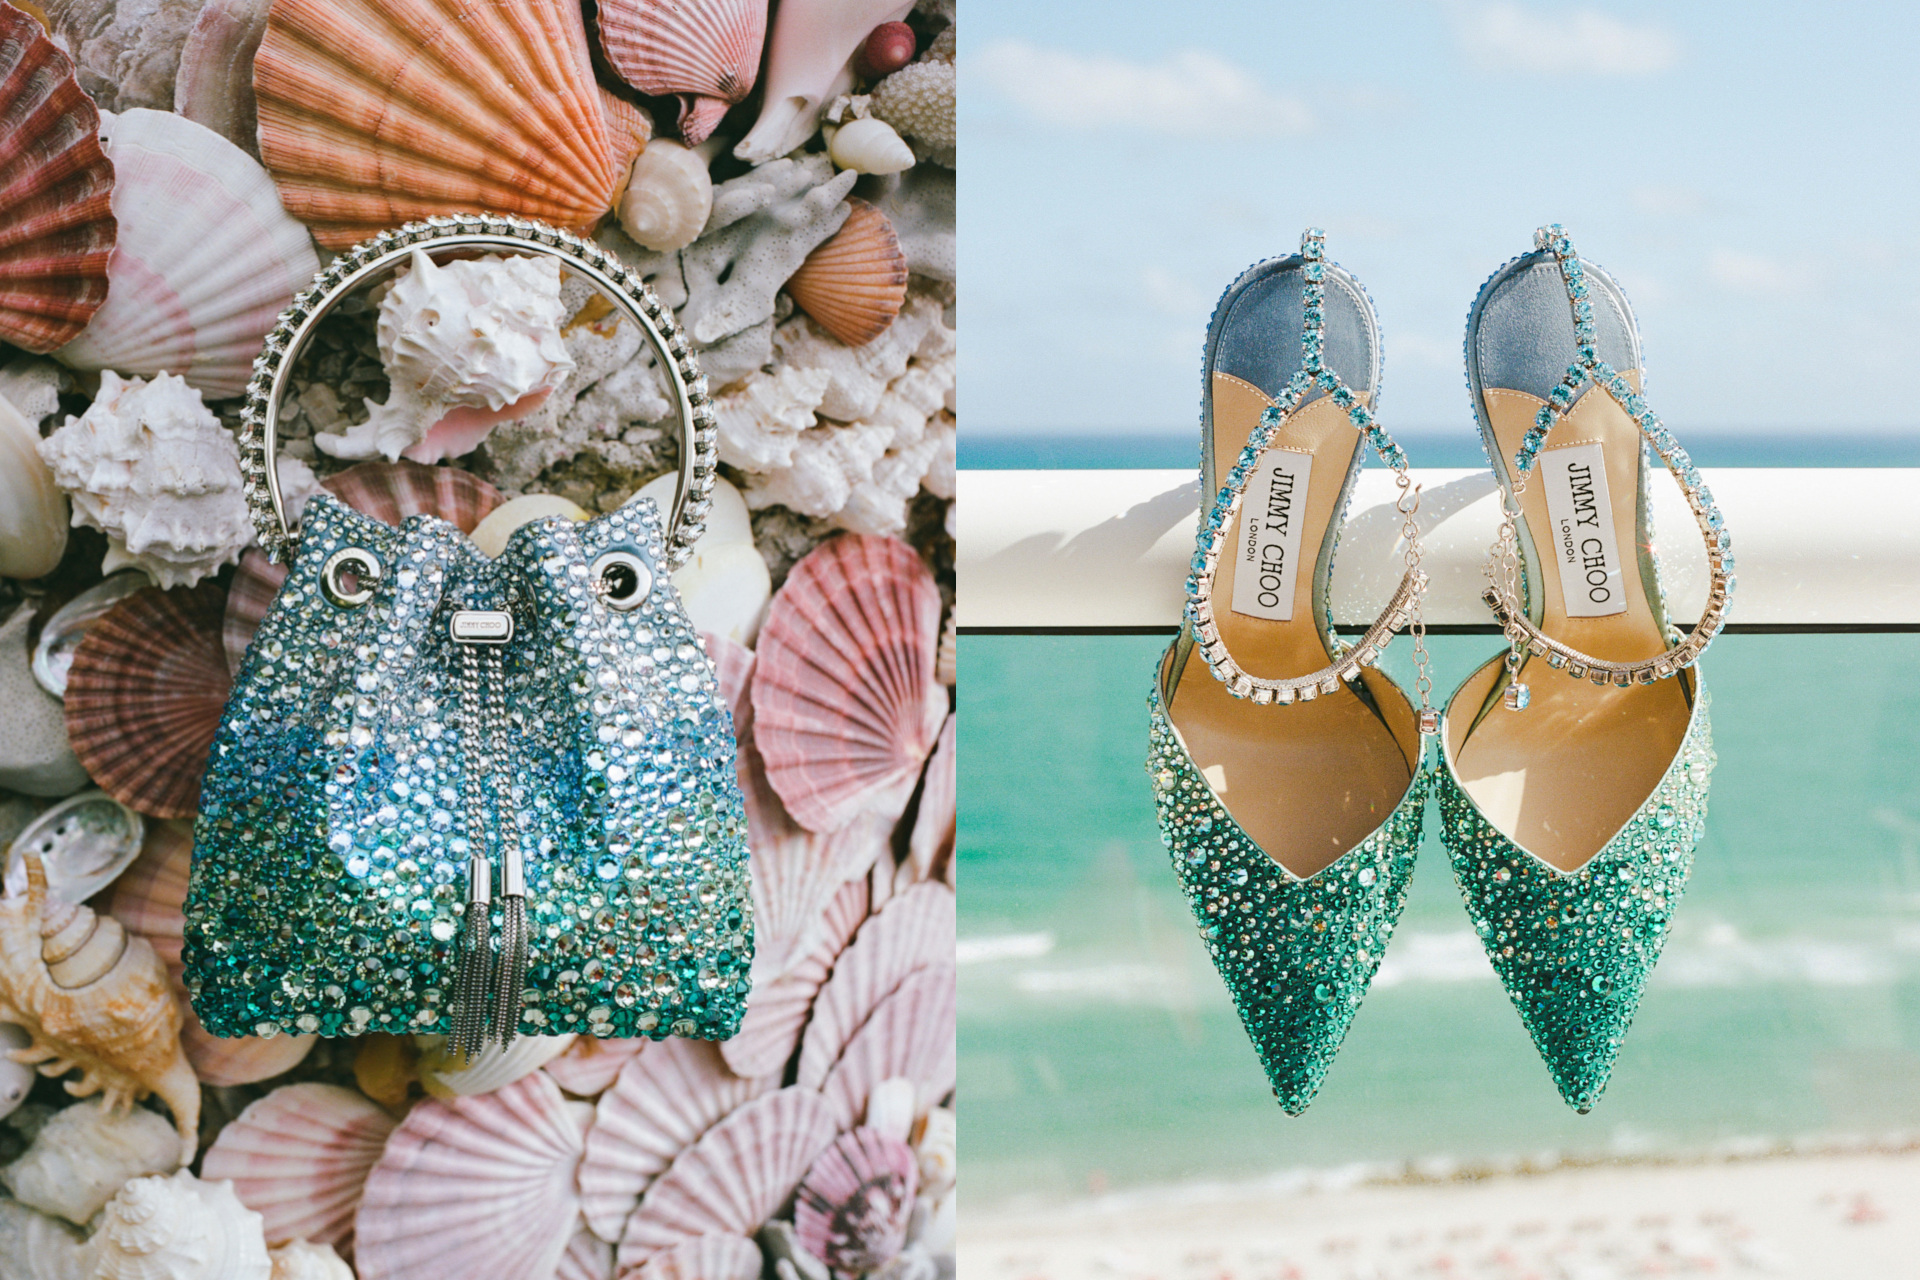 Blue sparkly bag on shells and blue sparkly heels hung up on barrier by ocean